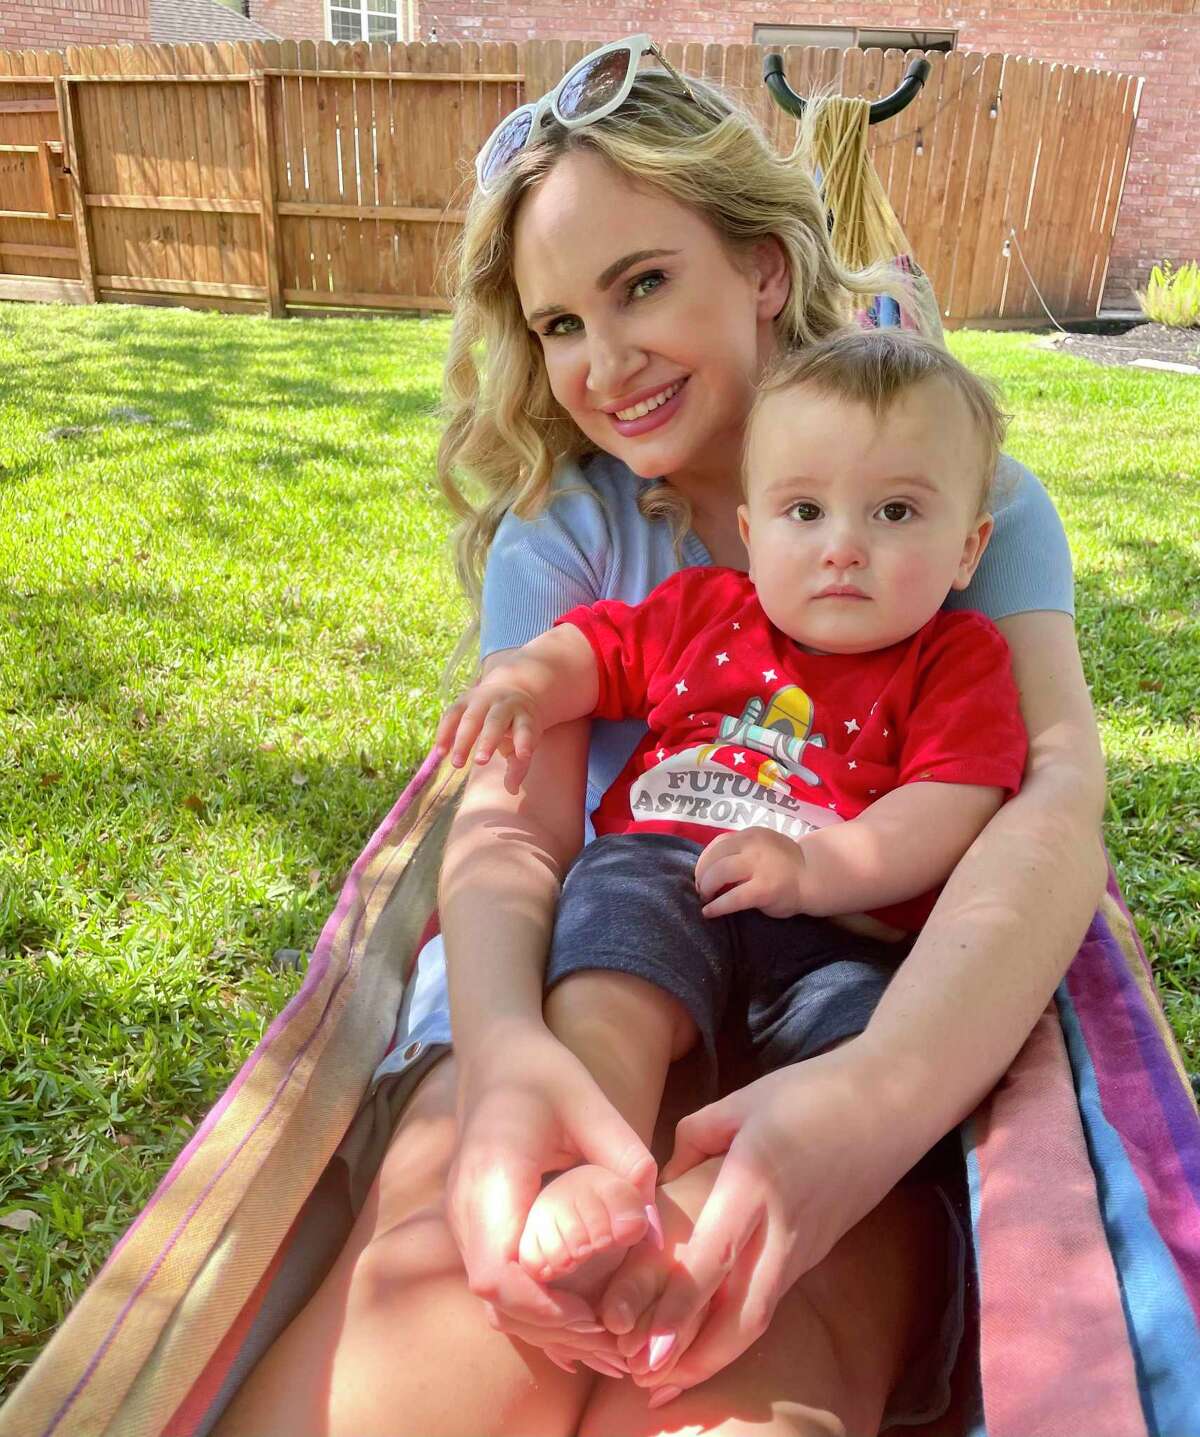 Elizabeth Markowitz, 28, poses with her 1-year-old son Asher. Markowitz recently moved to Texas from Alaska, and her history of miscarriage combined with uncertainty created by Texas anti-abortion law's vague emergency exception has led her to postpone having more children while living in the state.